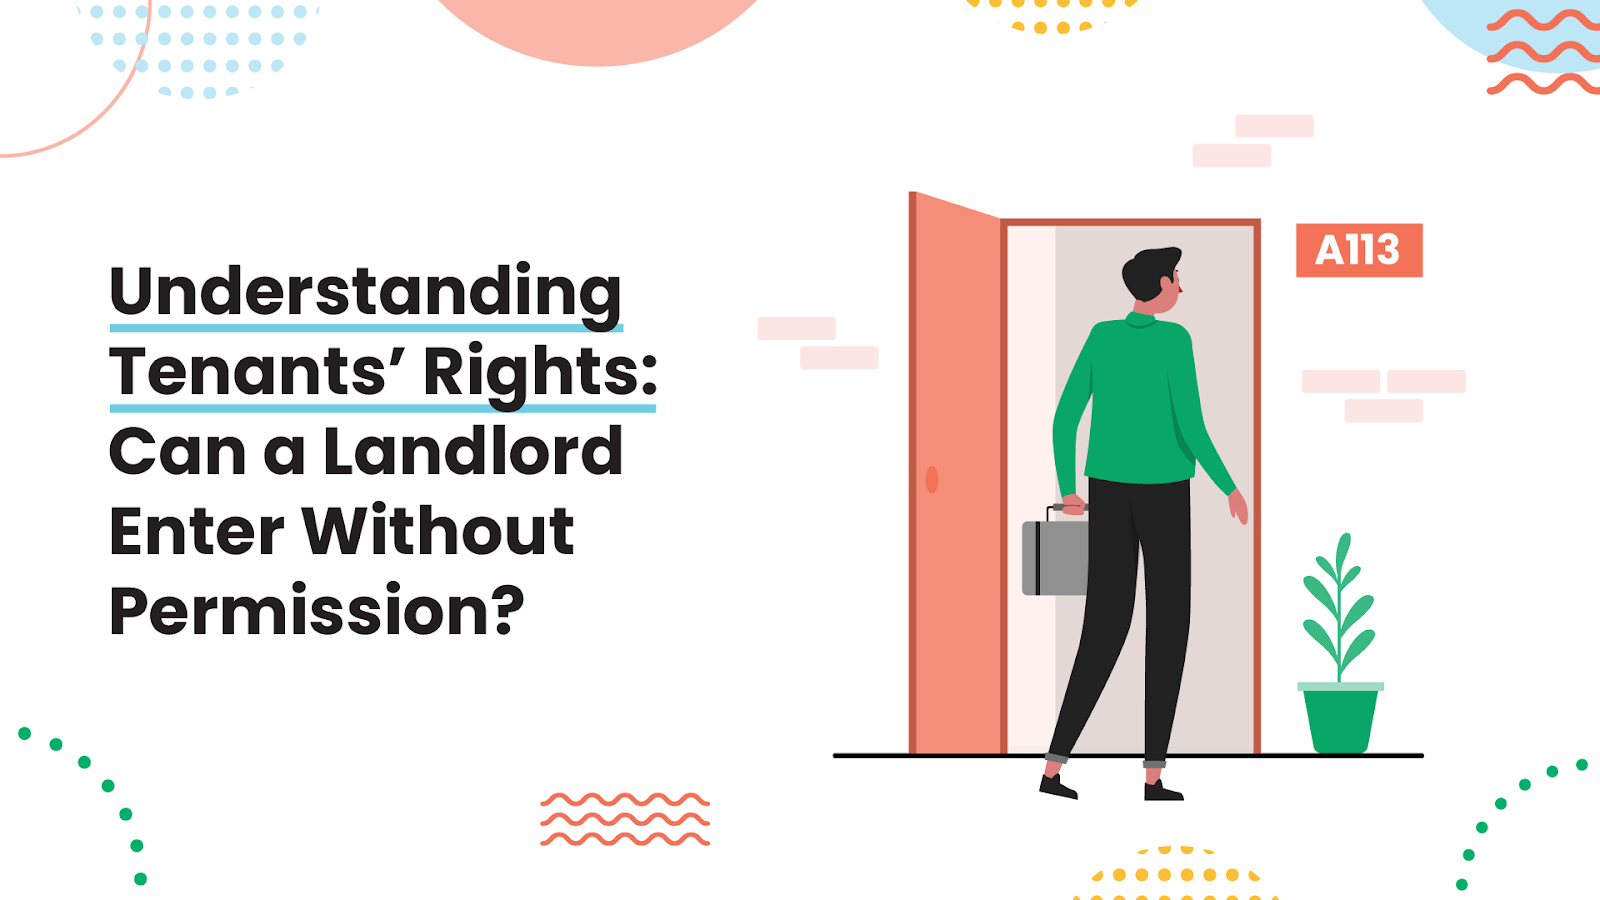 Know your rights: Can a landlord enter without permission?